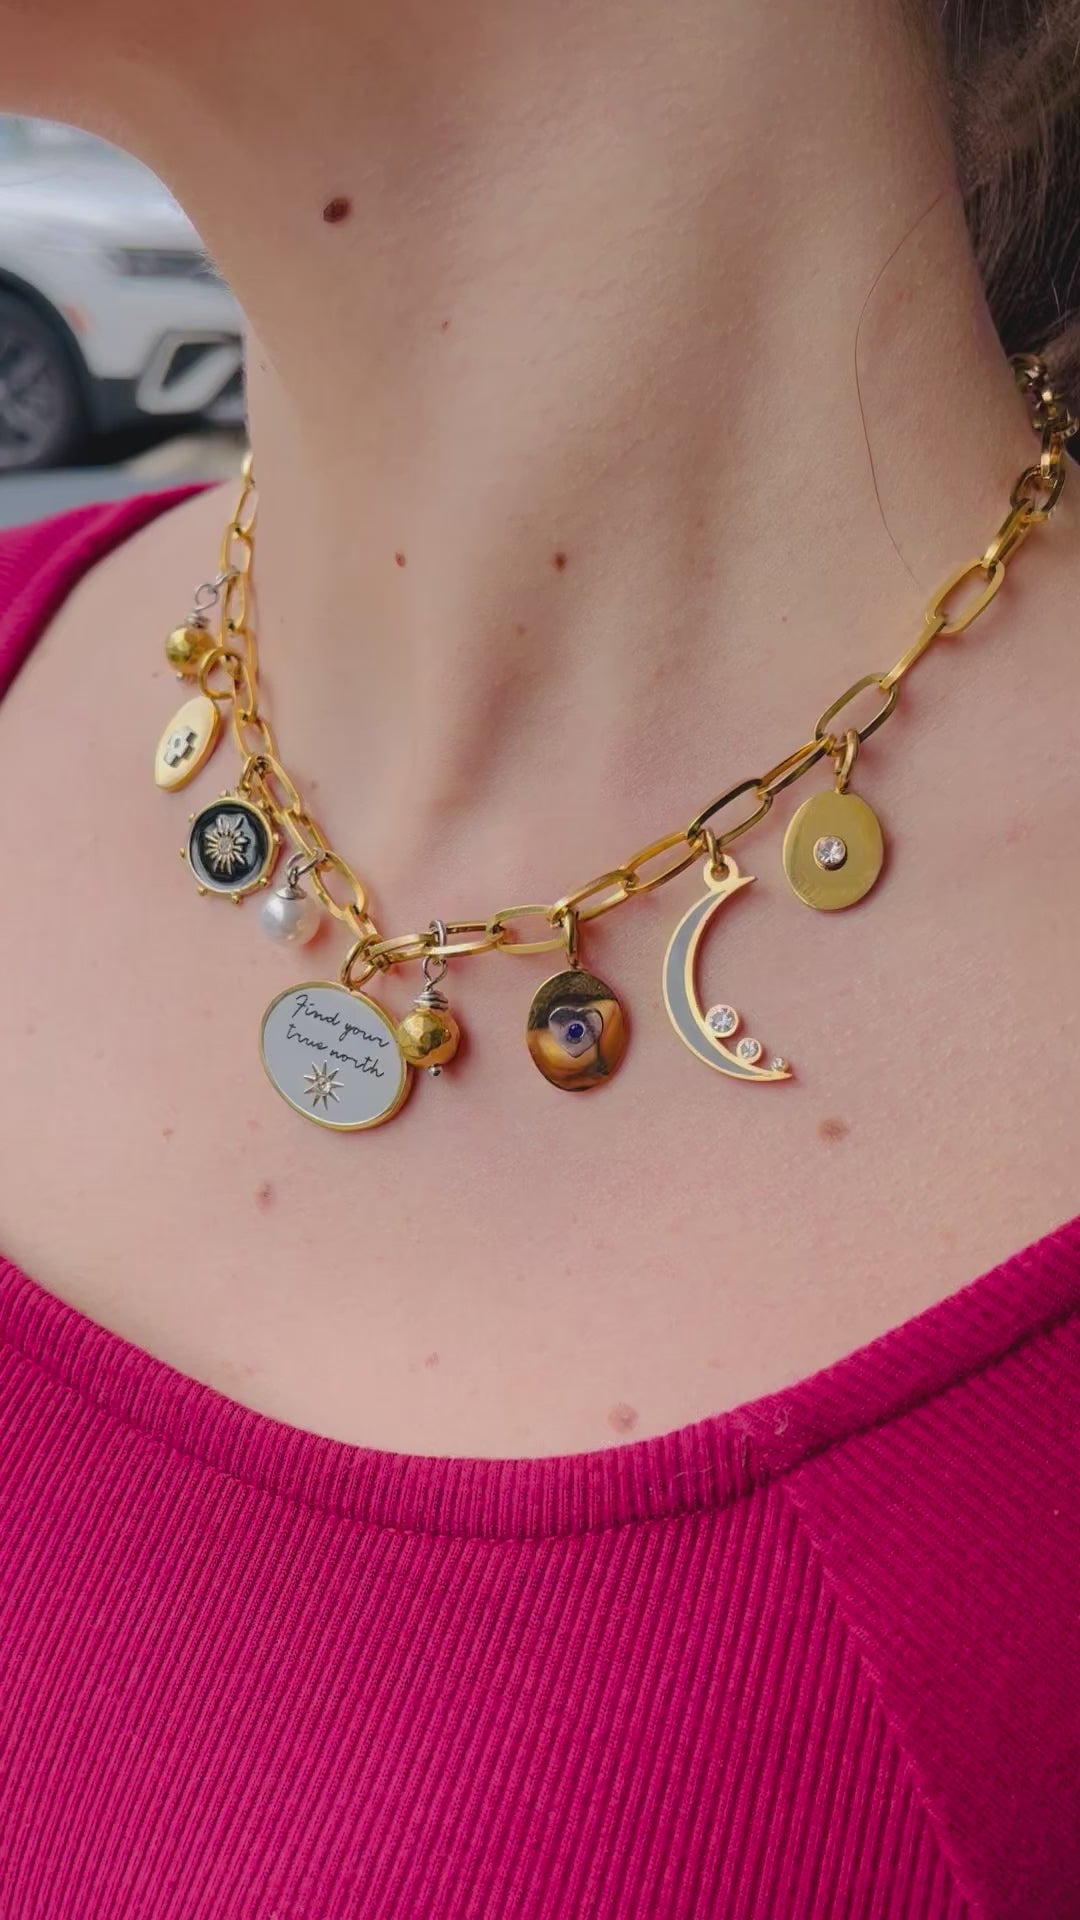 Find Your True North Charm Necklace